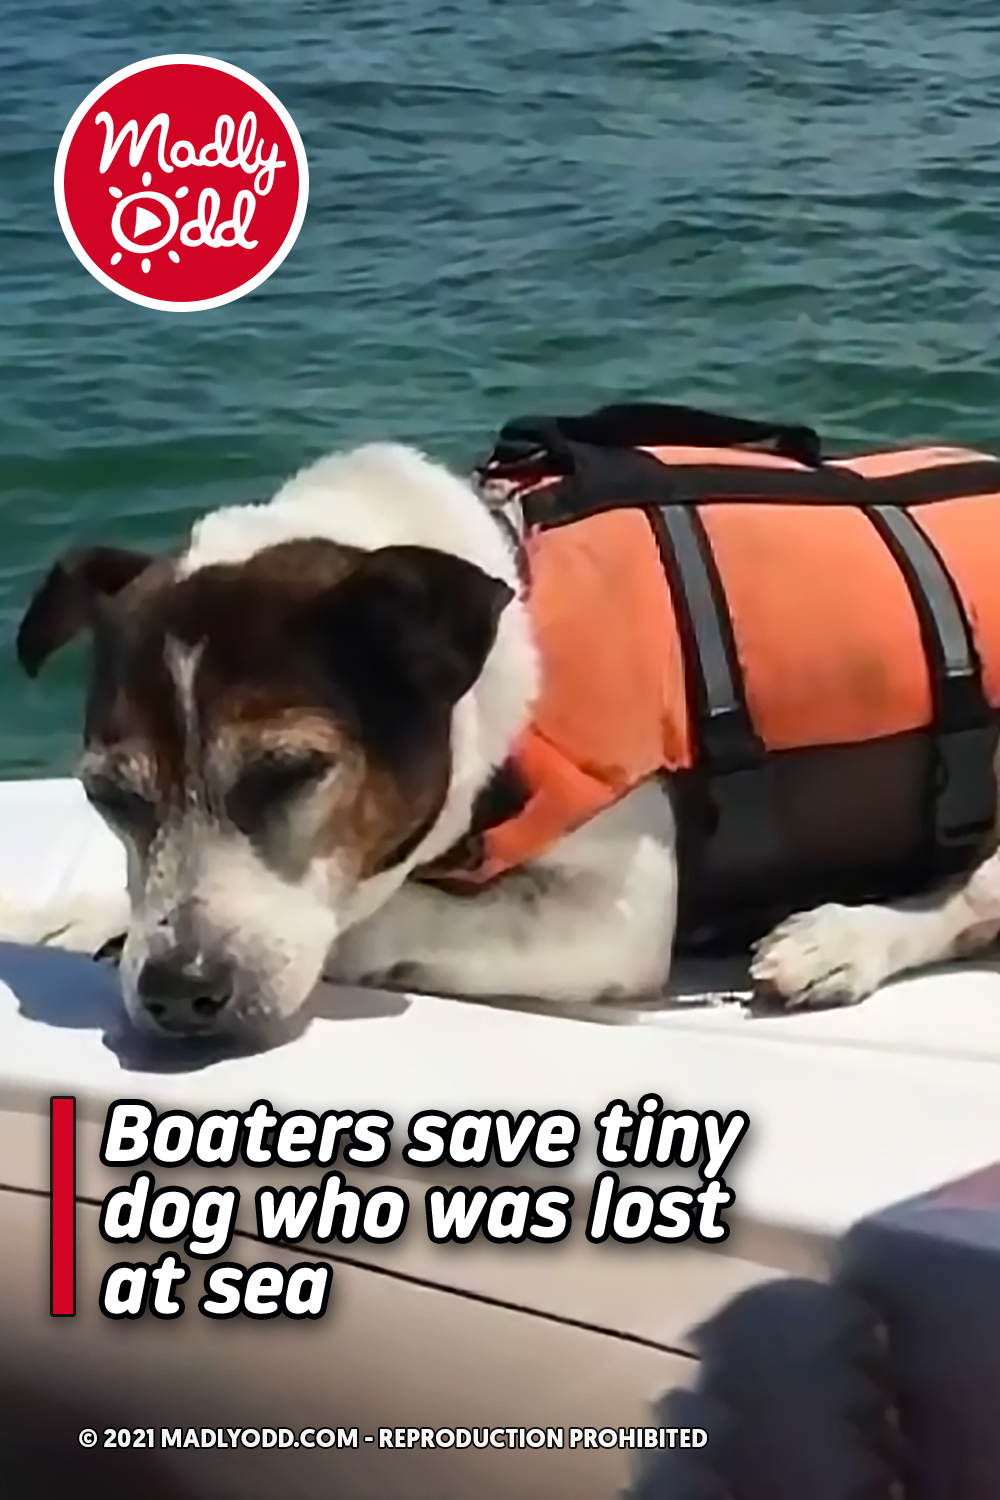 Boaters save tiny dog who was lost at sea